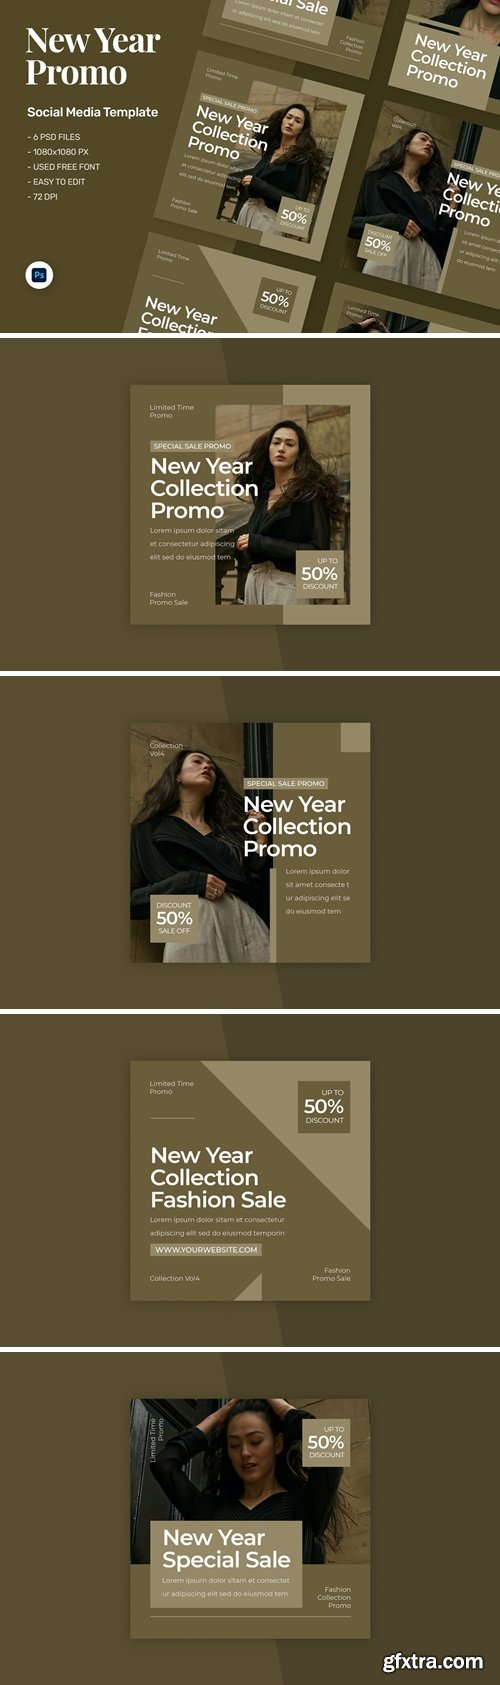 New Year Sale - Social Media Template